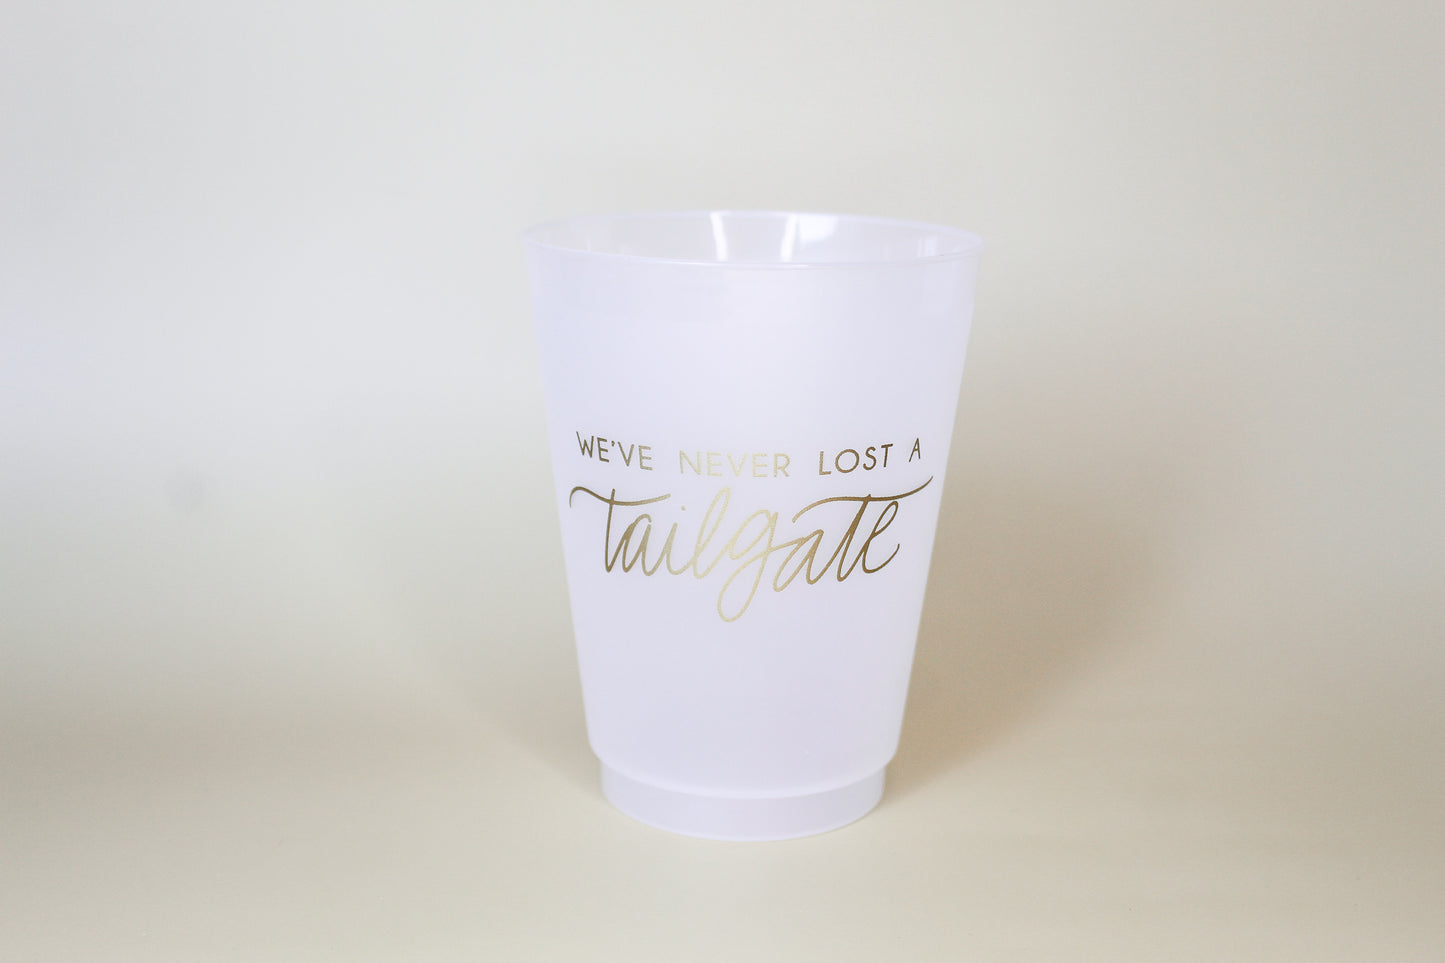 Gold We've Never Lost a Tailgate' cup, Tailgate party cup, Football party cup